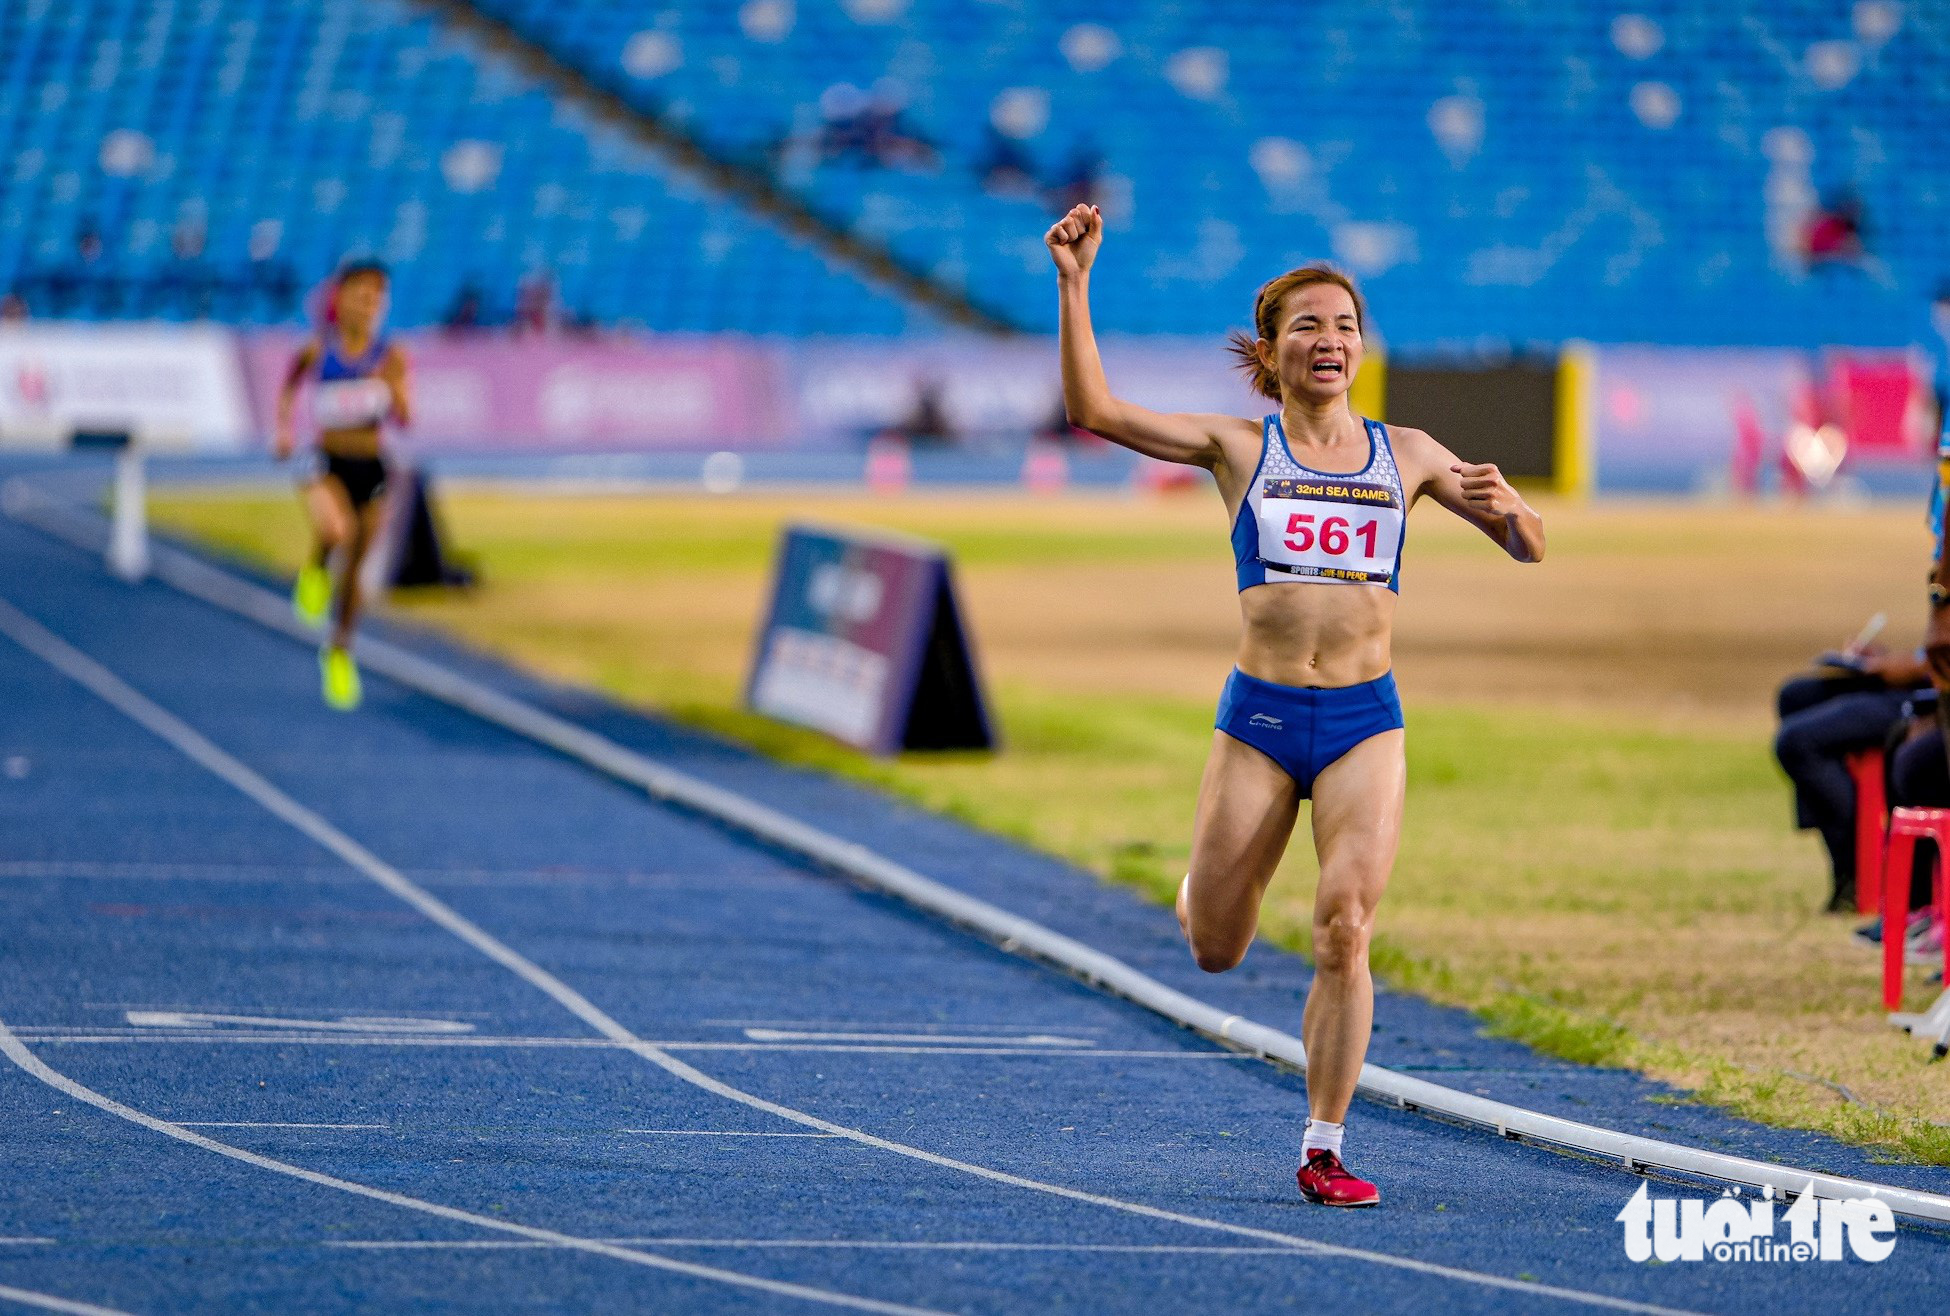 Vietnamese runner Nguyen Thi Oanh finishes first in women’s 3,000-meter hurdles at the 2023 Southeast Asian Games in Cambodia, May 9, 2023. Photo: Nam Tran / Tuoi Tre